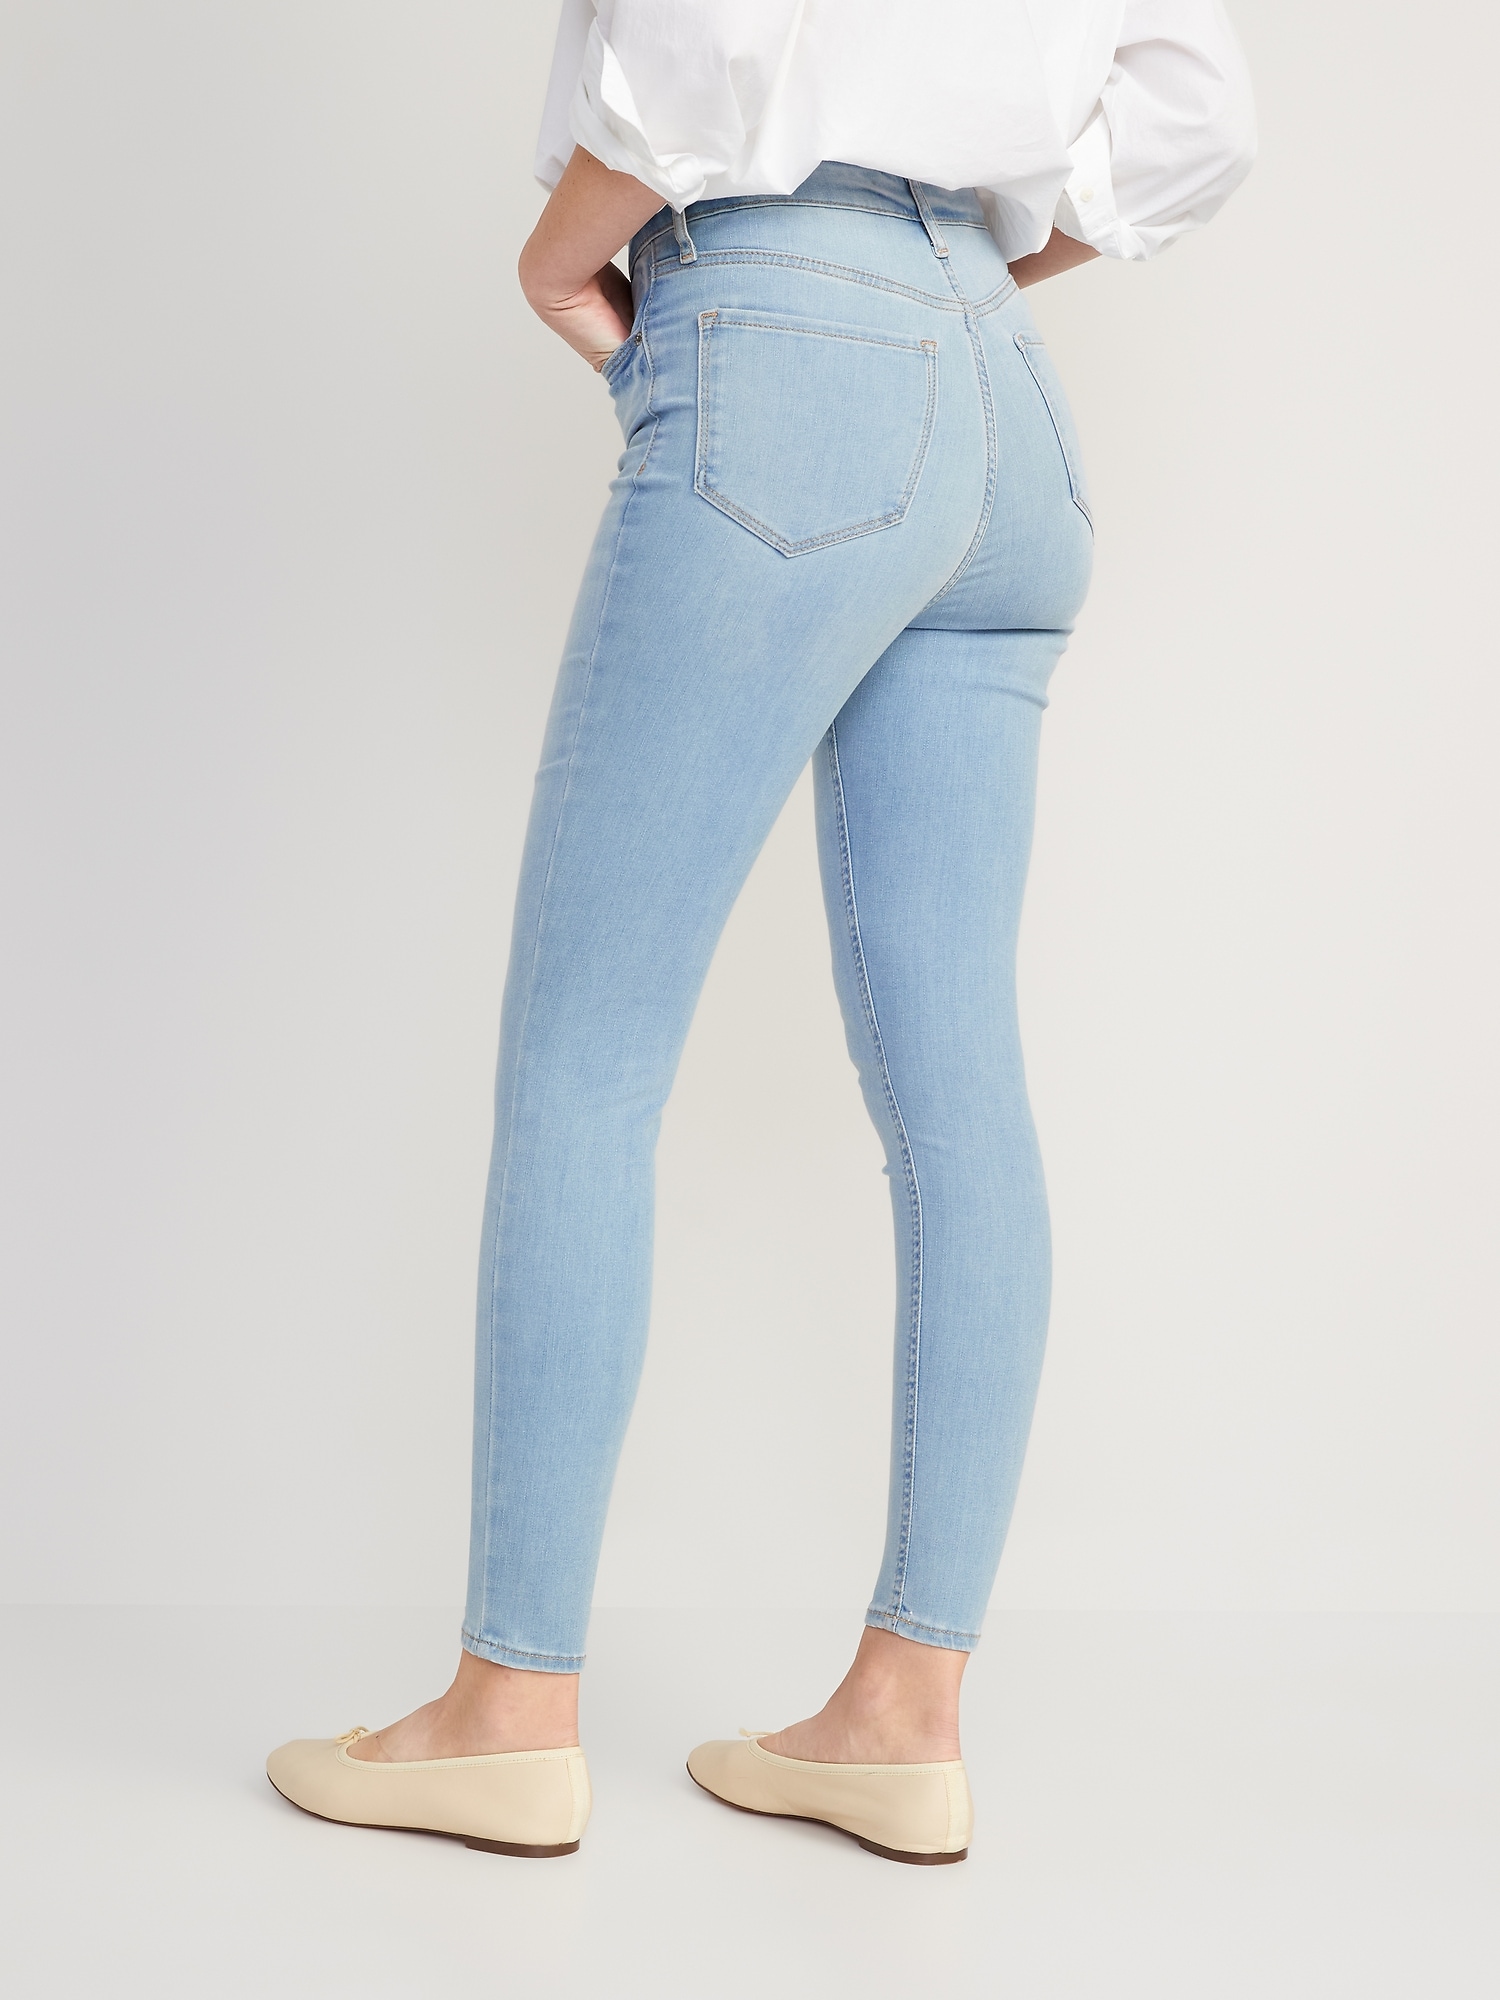 Jeans | Extra for Women 3-Sizes-in-1 Old Navy Rockstar High-Waisted Super-Skinny FitsYou